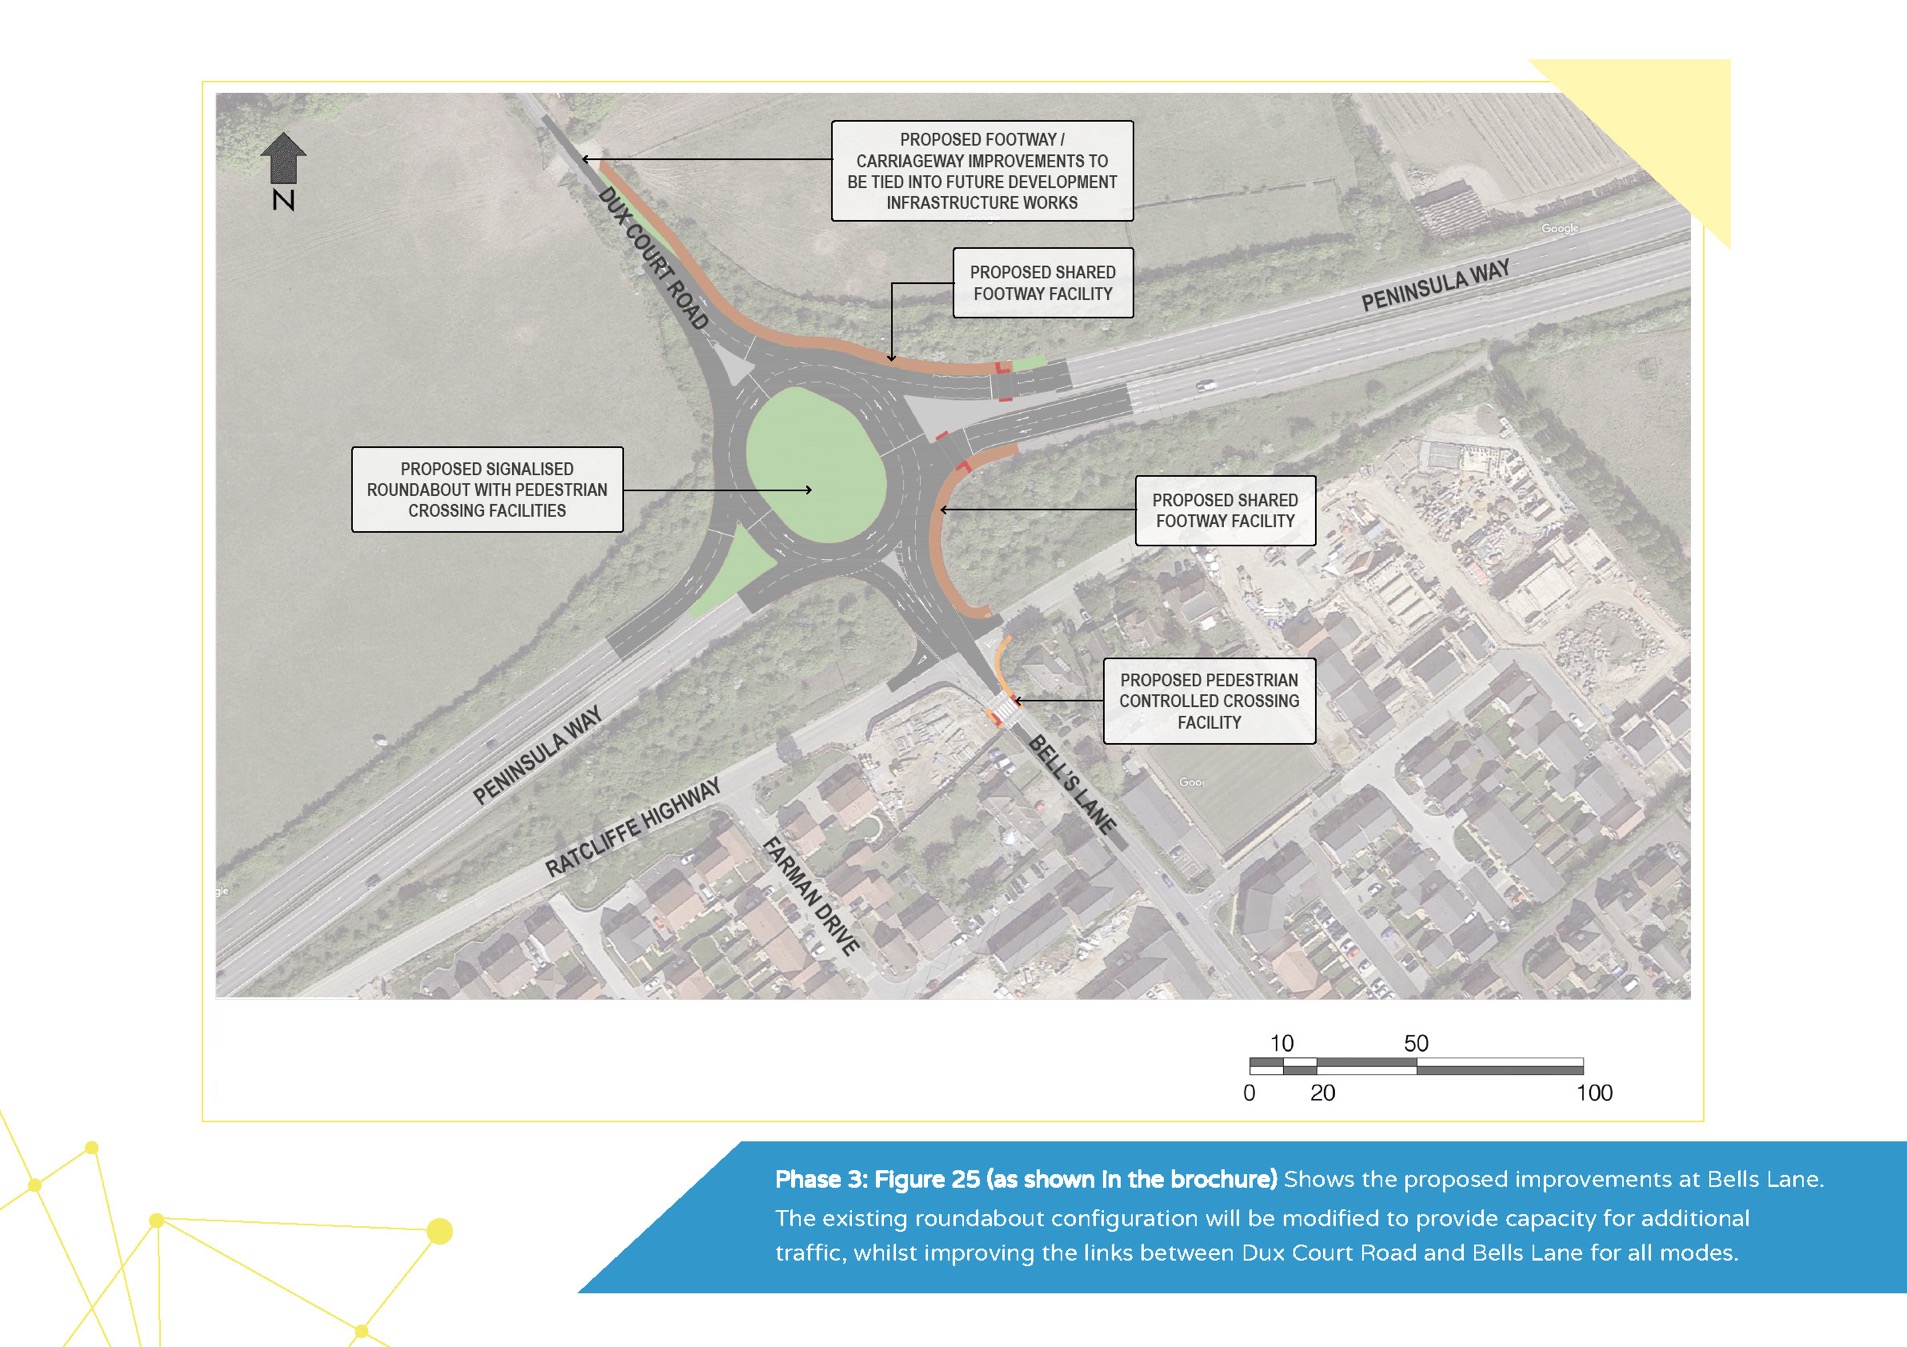 The proposed improvements at Bells Lane